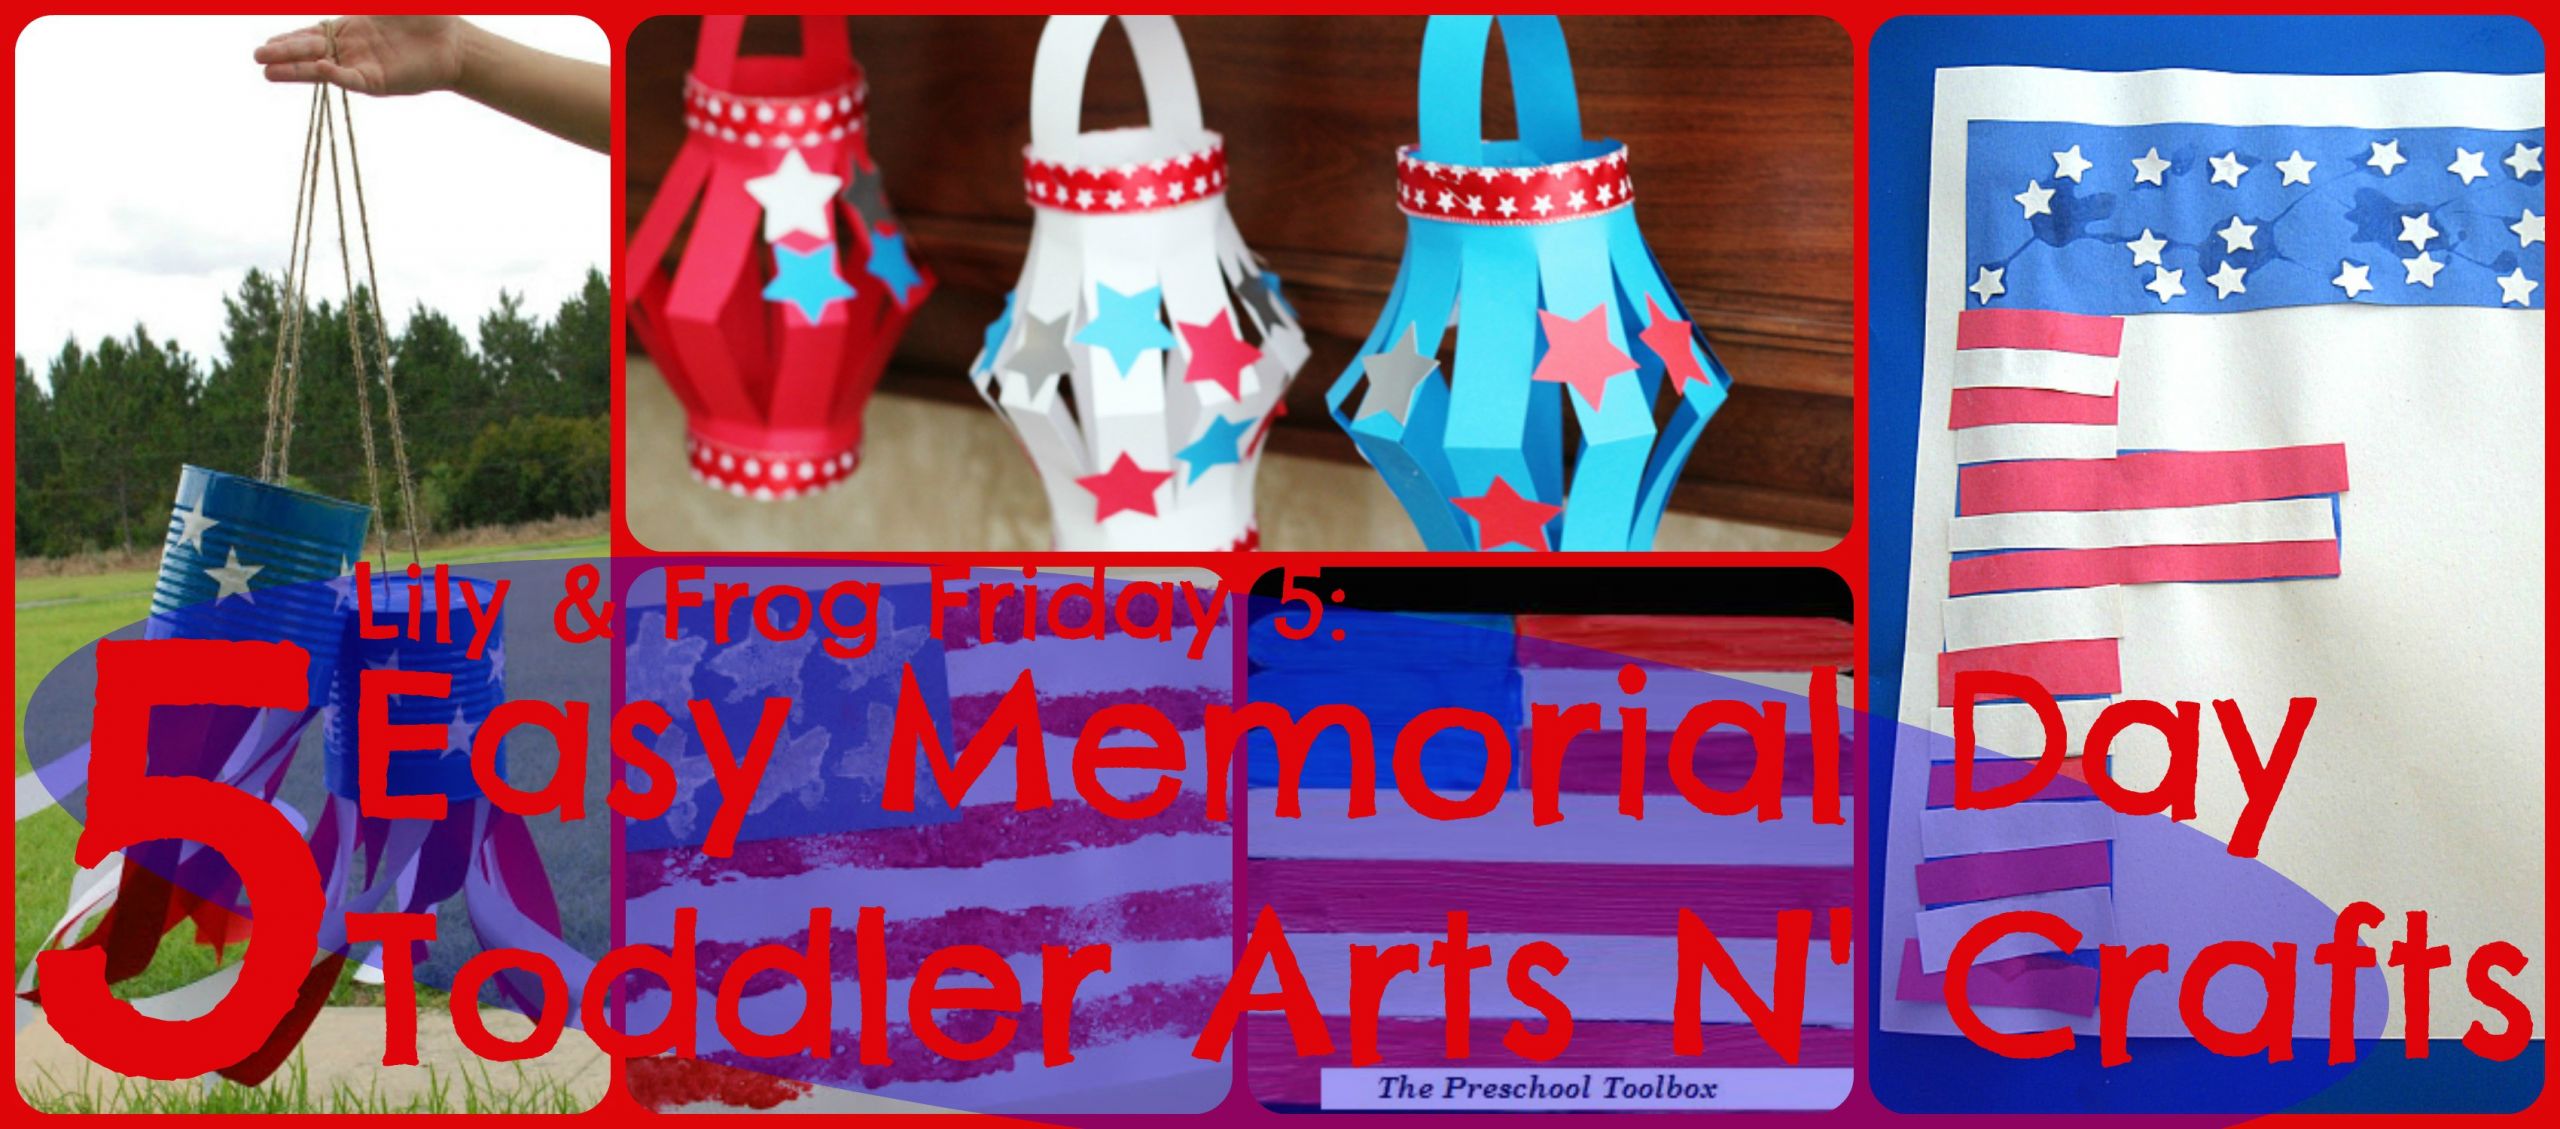 Memorial Day Crafts For Preschool
 Lily & Frog Friday 5 5 Easy Memorial Day Toddler Arts N